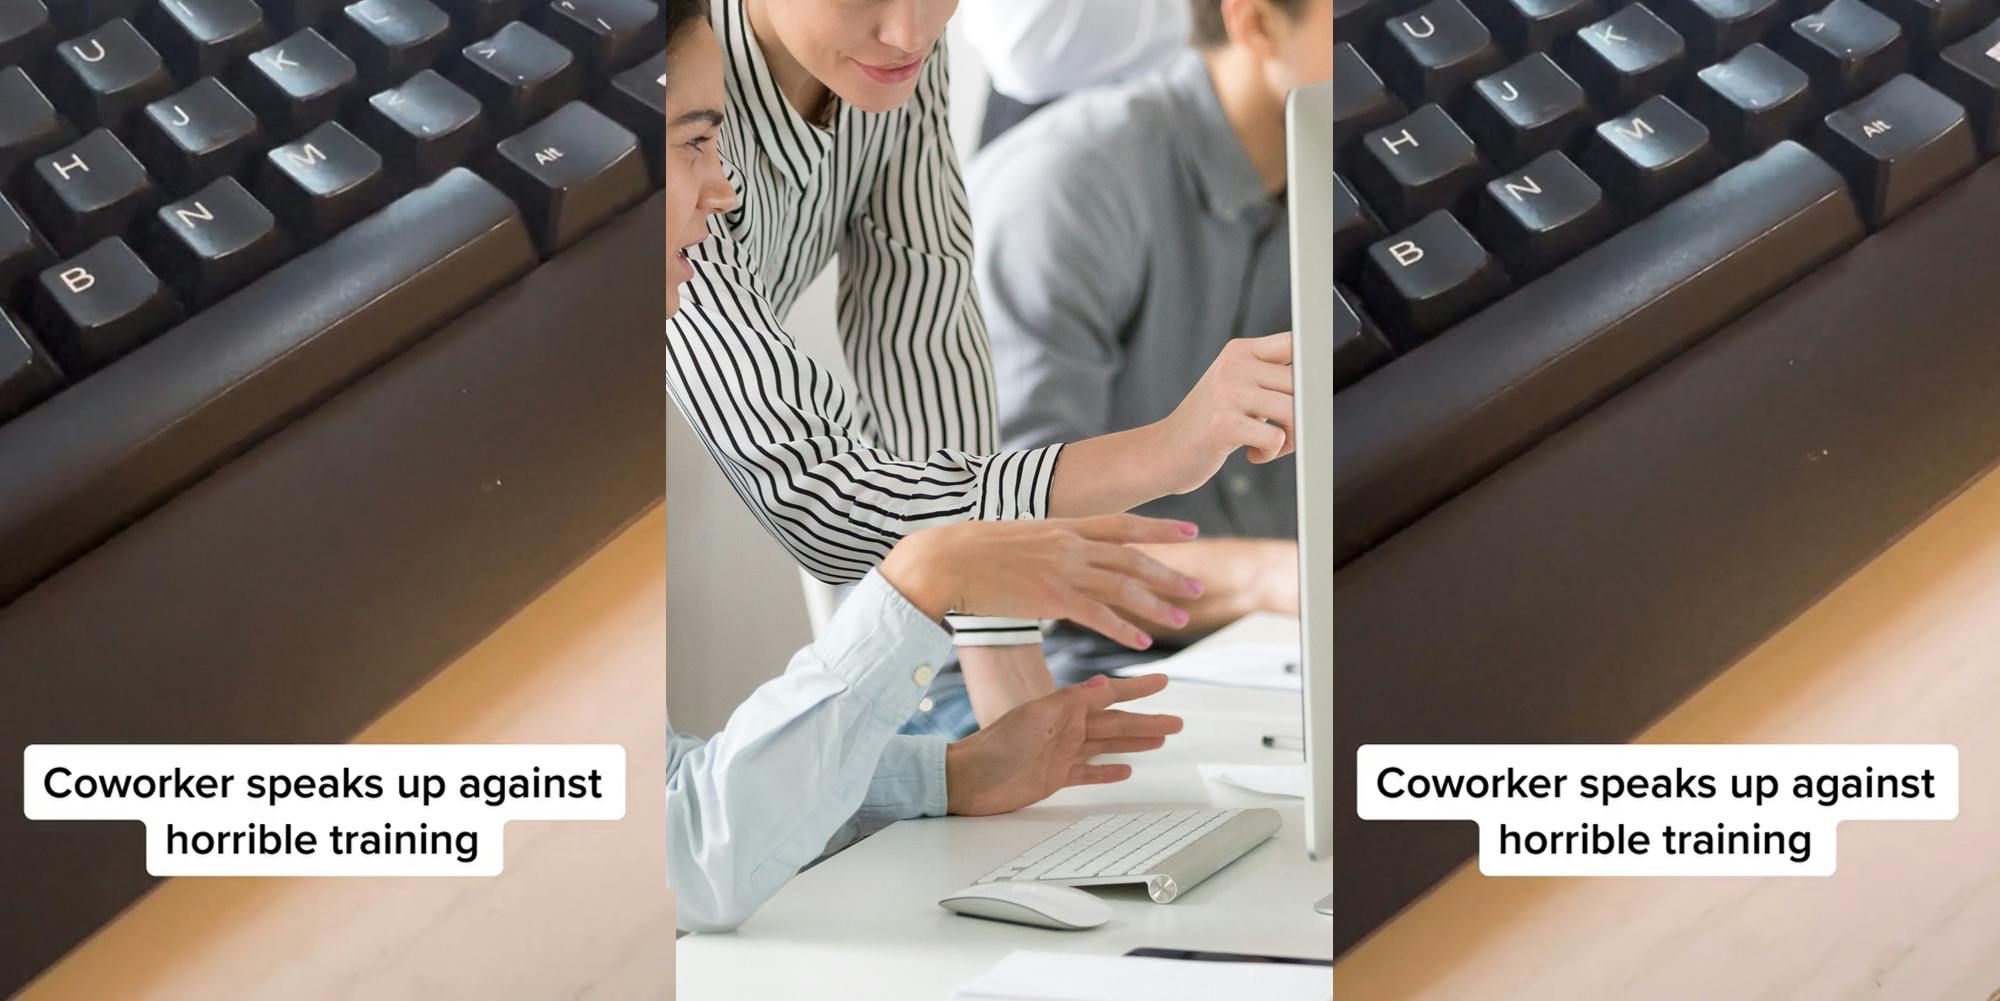 keyboard with caption "Coworker speaks up against horrible training" (l) woman training coworker on how to use computer program (c) keyboard with caption "Coworker speaks up against horrible training" (r)